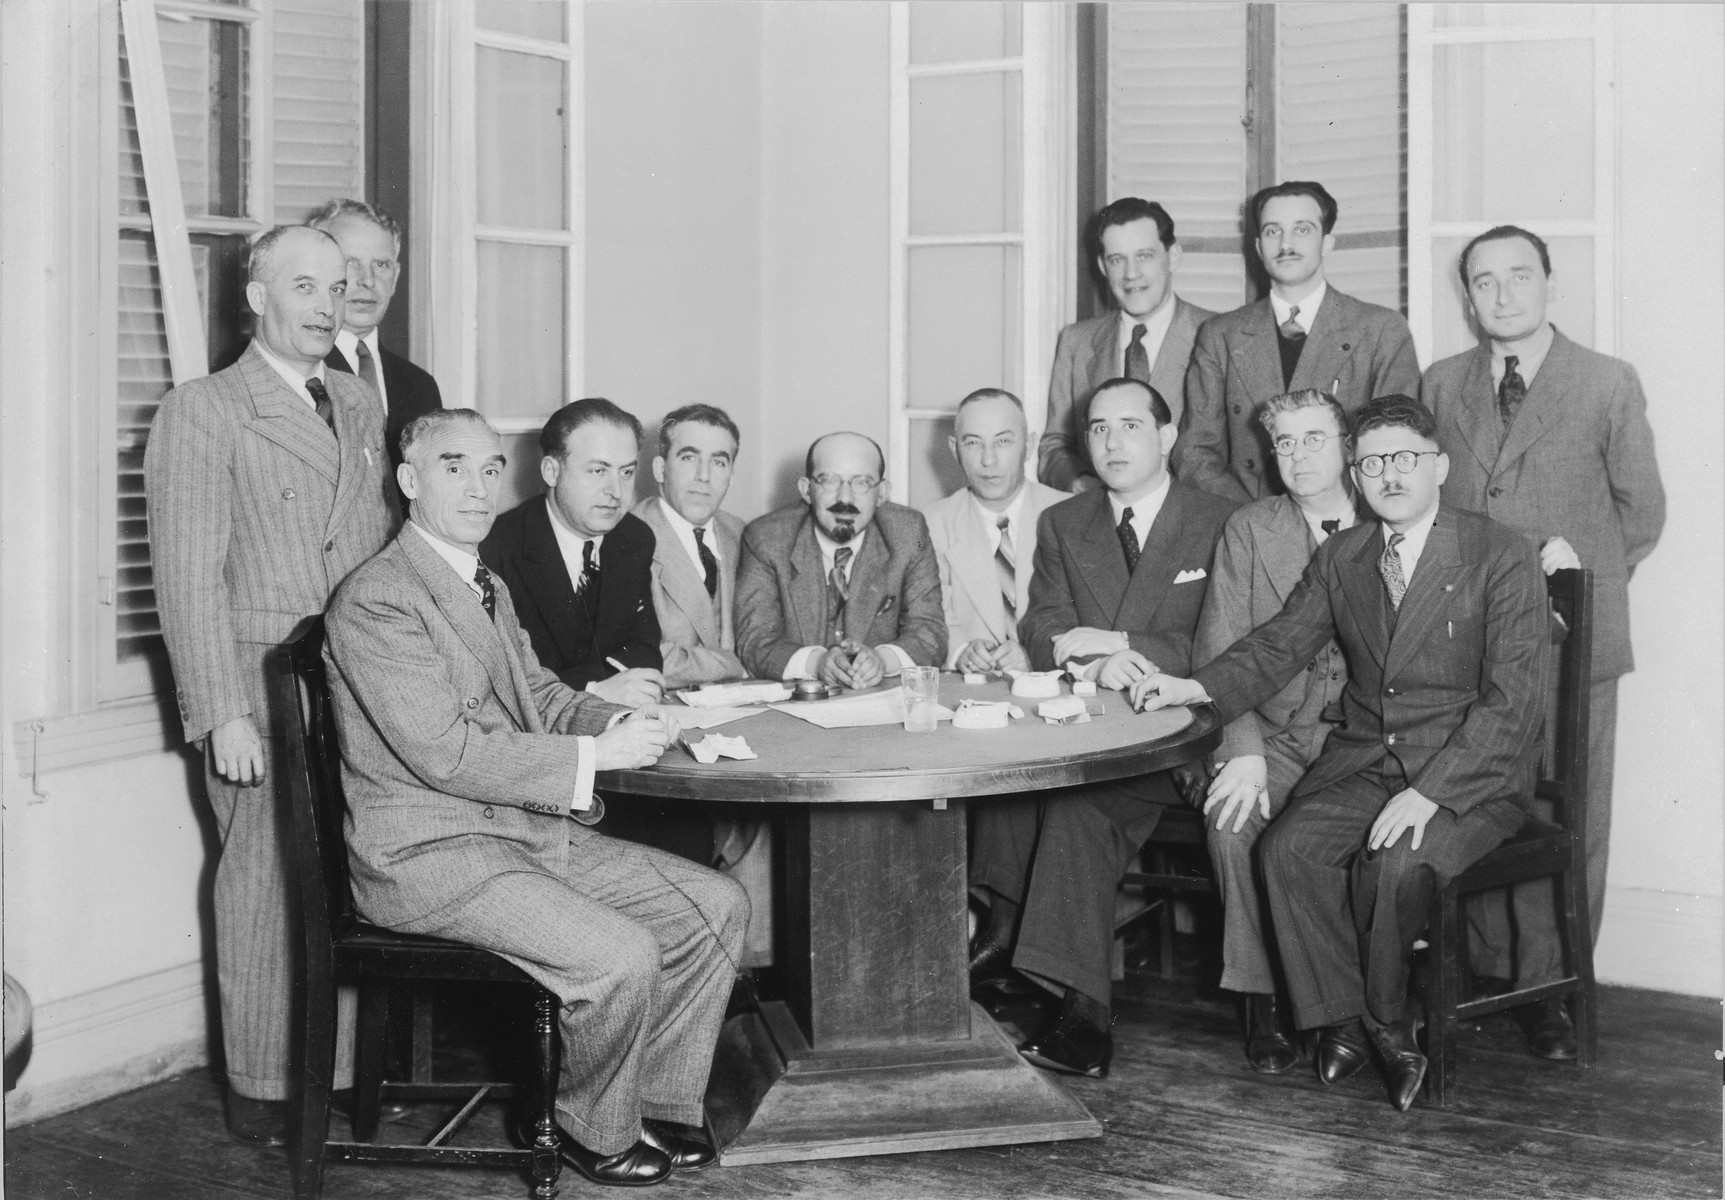 Group photograph of the leadership of the Kobe Jewish community.

Among those pictured are Anatole Ponevejsky (seated third from the left), Moise Moiseeff (fourth from the left), Anatole Ponve (fifth from the left), and Solomon Stolowy (standing, far left).